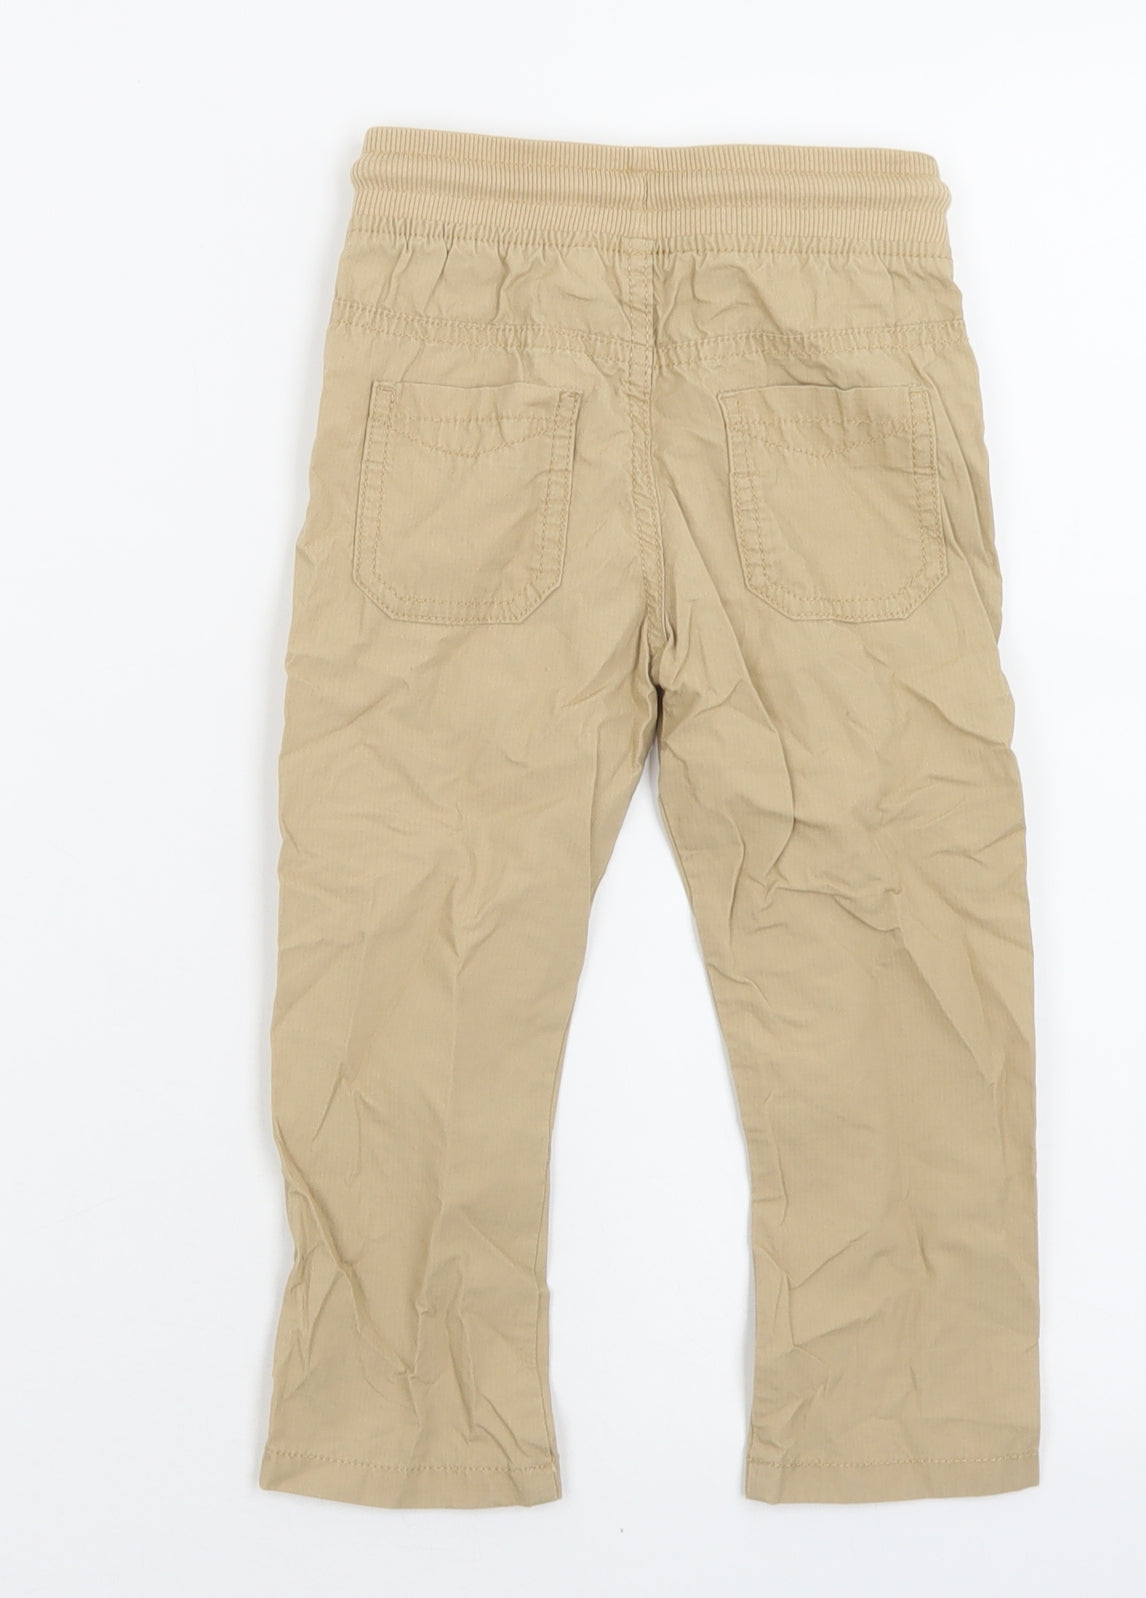 Marks and Spencer Boys Beige  Cotton Capri Trousers Size 2-3 Years  Regular Tie